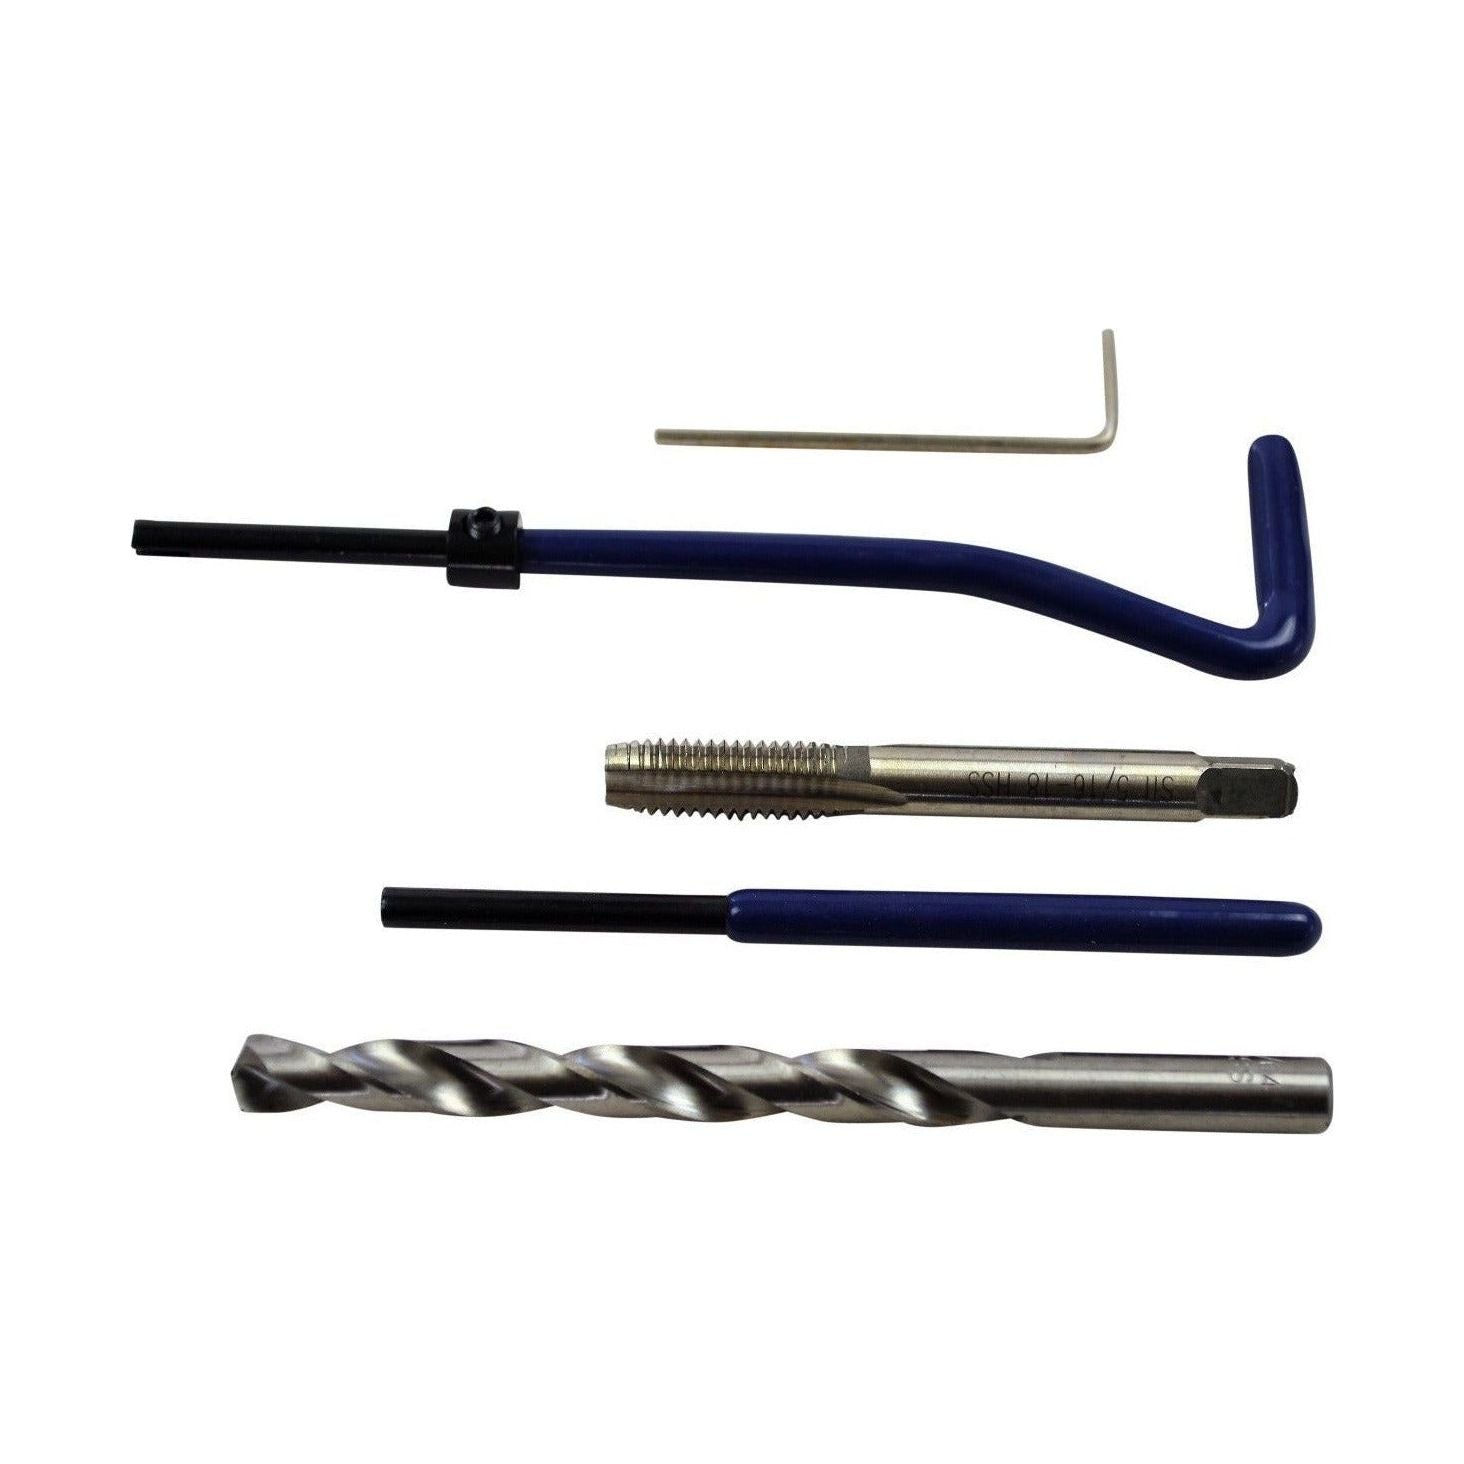 Helicoil Kit 5/16-24 Thread Repair Set Includes 25 helical Type Inserts workshop tool